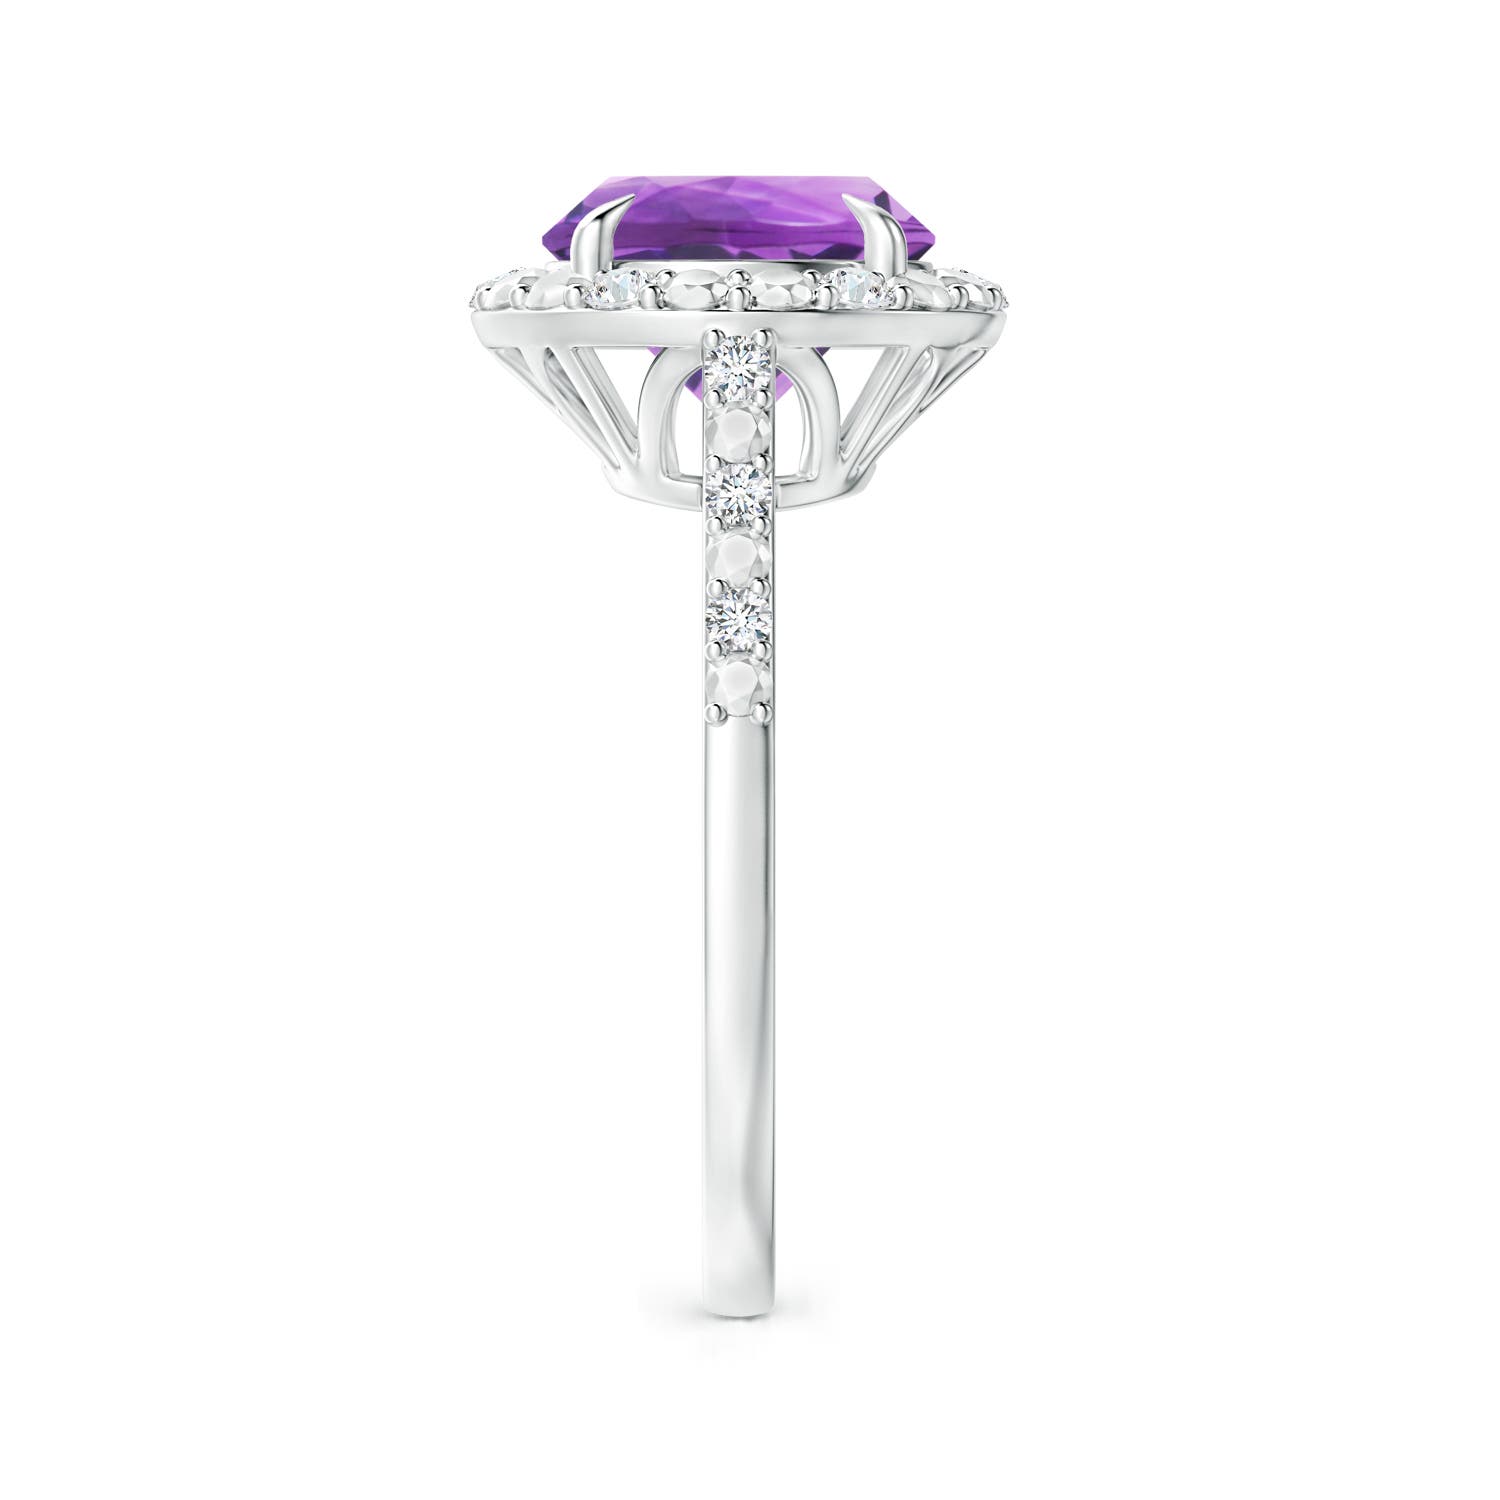 AA - Amethyst / 2.61 CT / 14 KT White Gold